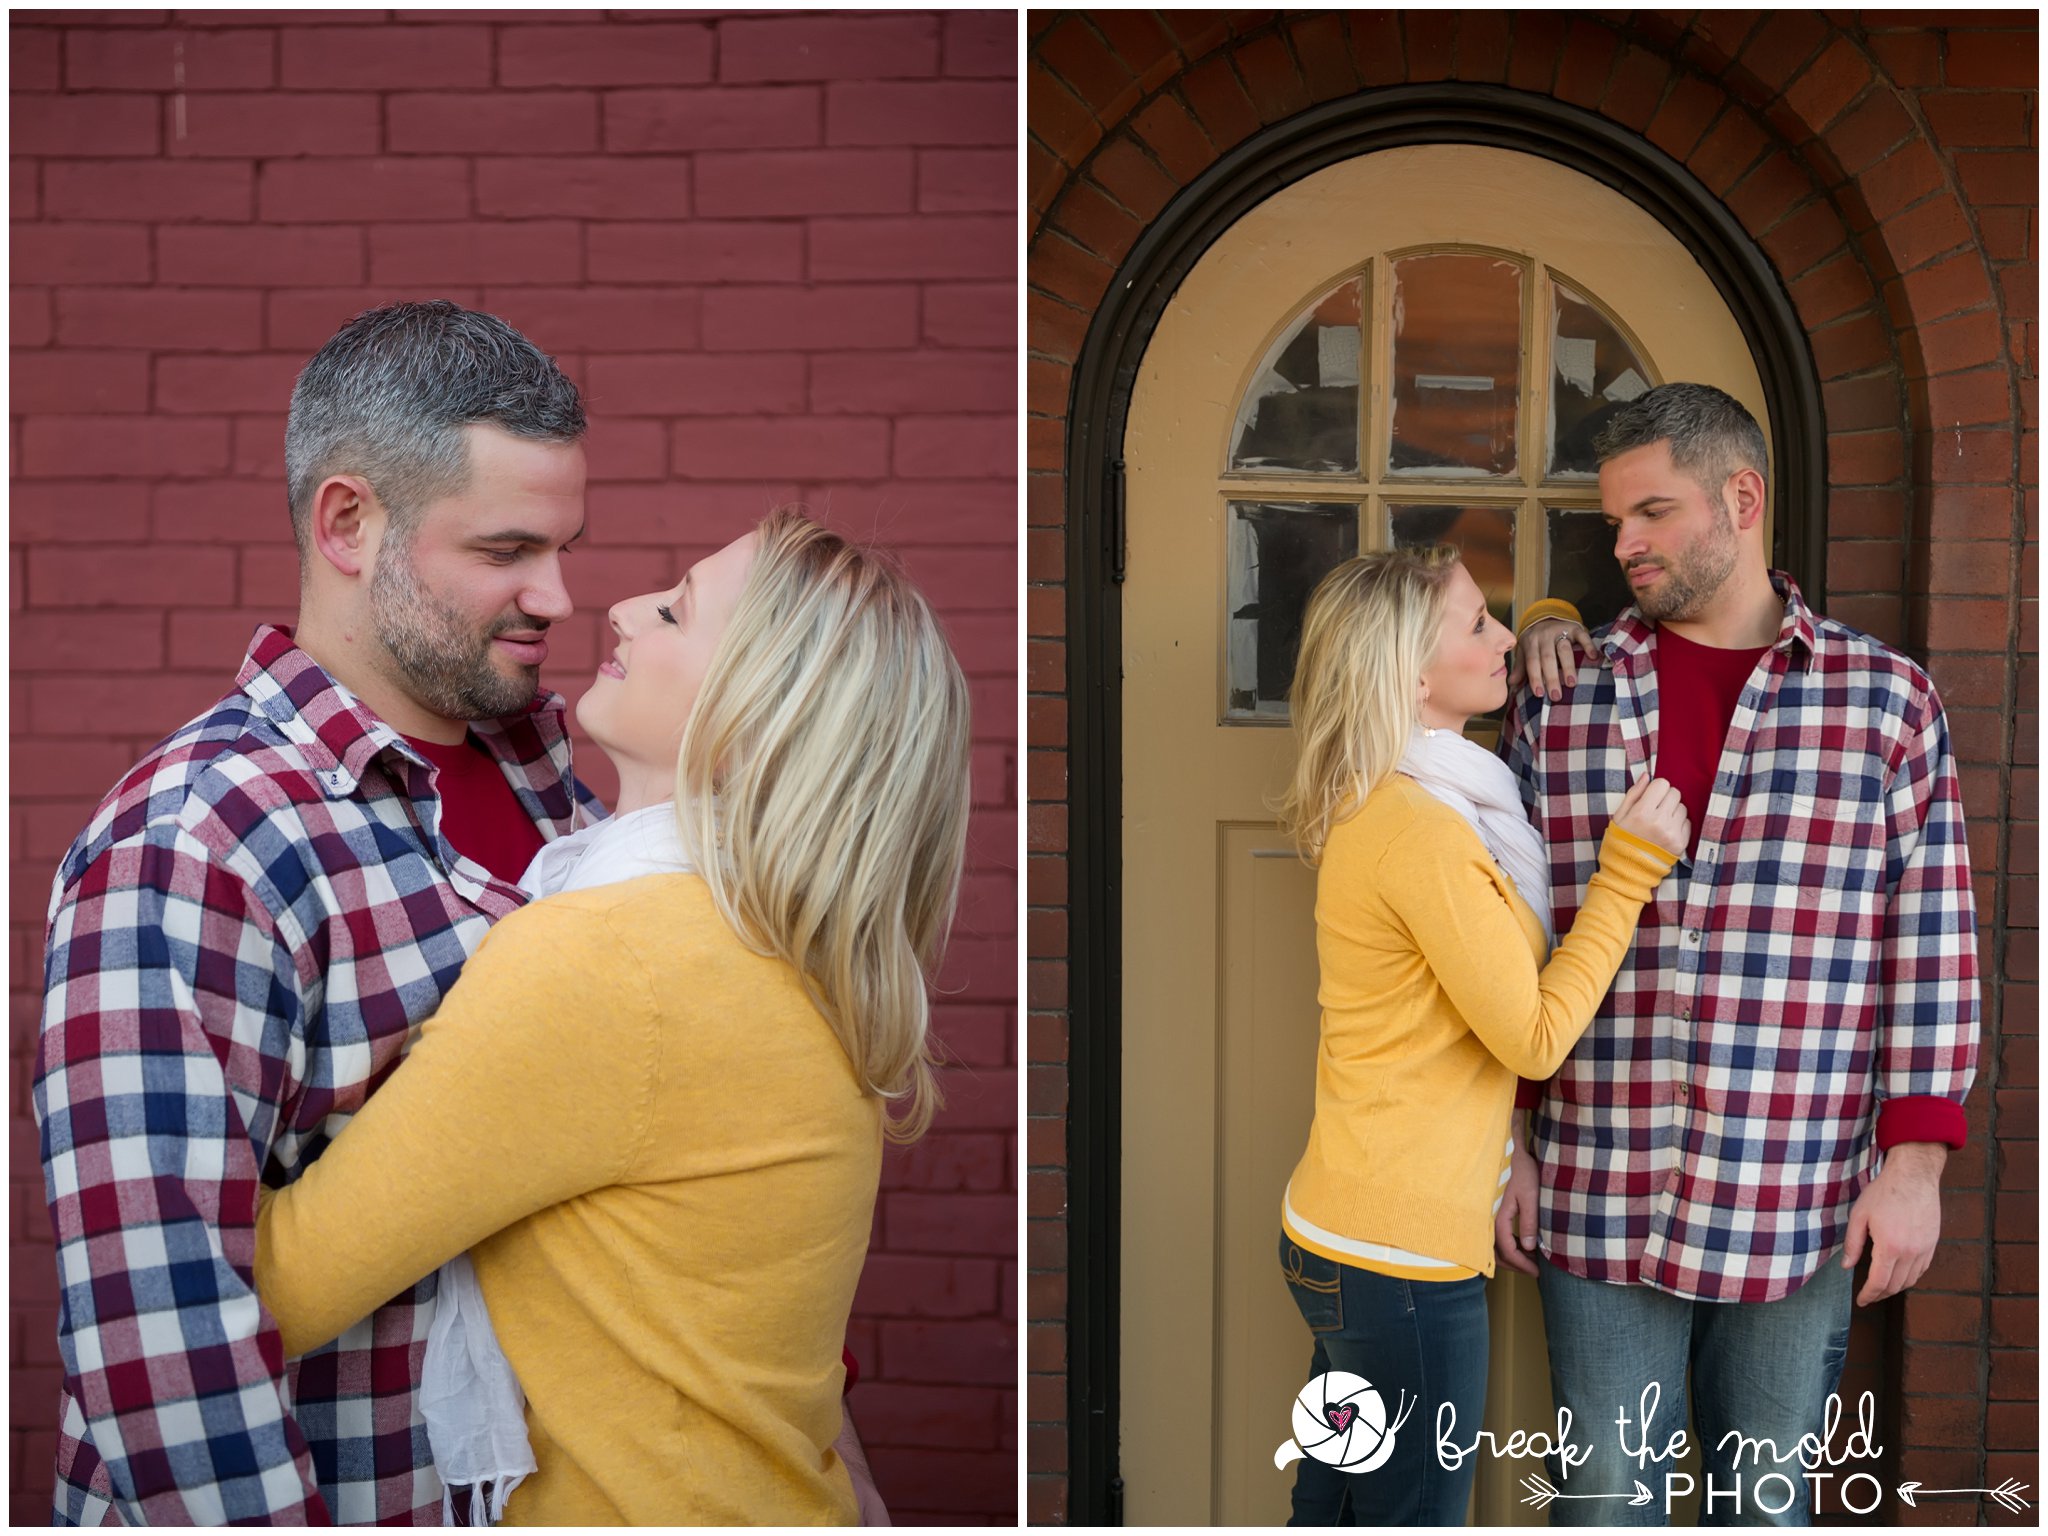 break-the-mold-photo-knoxville-tn-lenoir-city-downtown-outdoor-hiking-engagement-session_2015.jpg